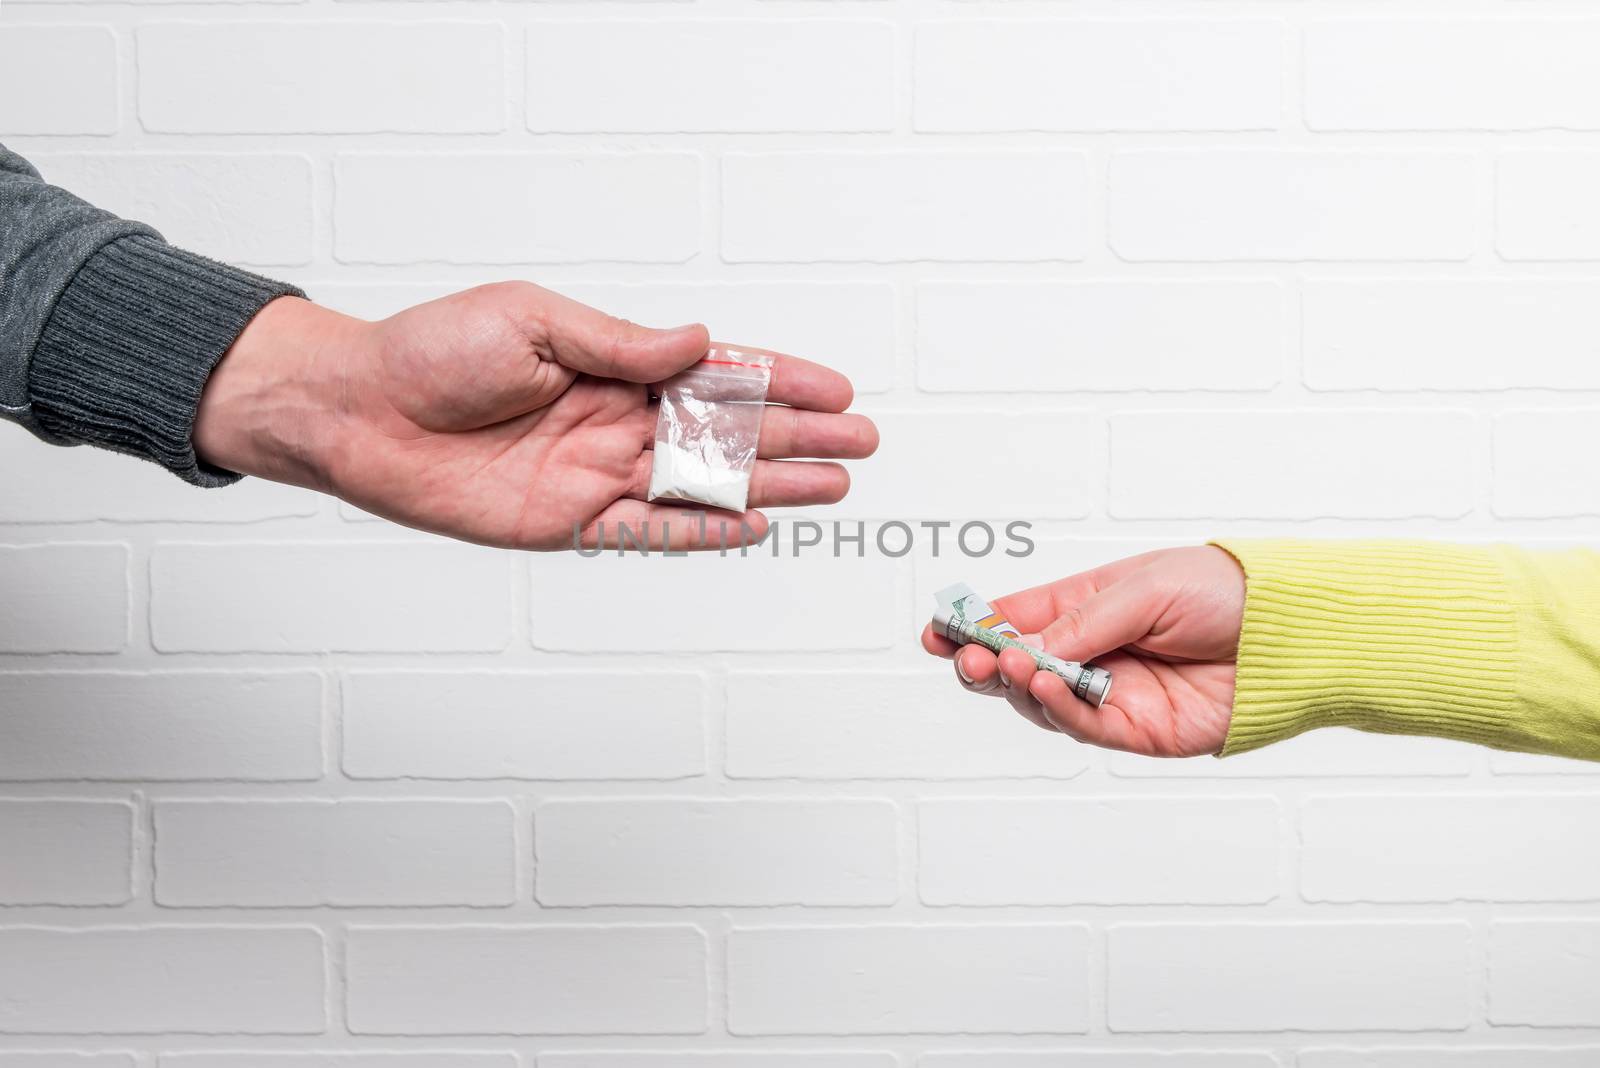 Transfer of money and drugs close-up against a white brick wall